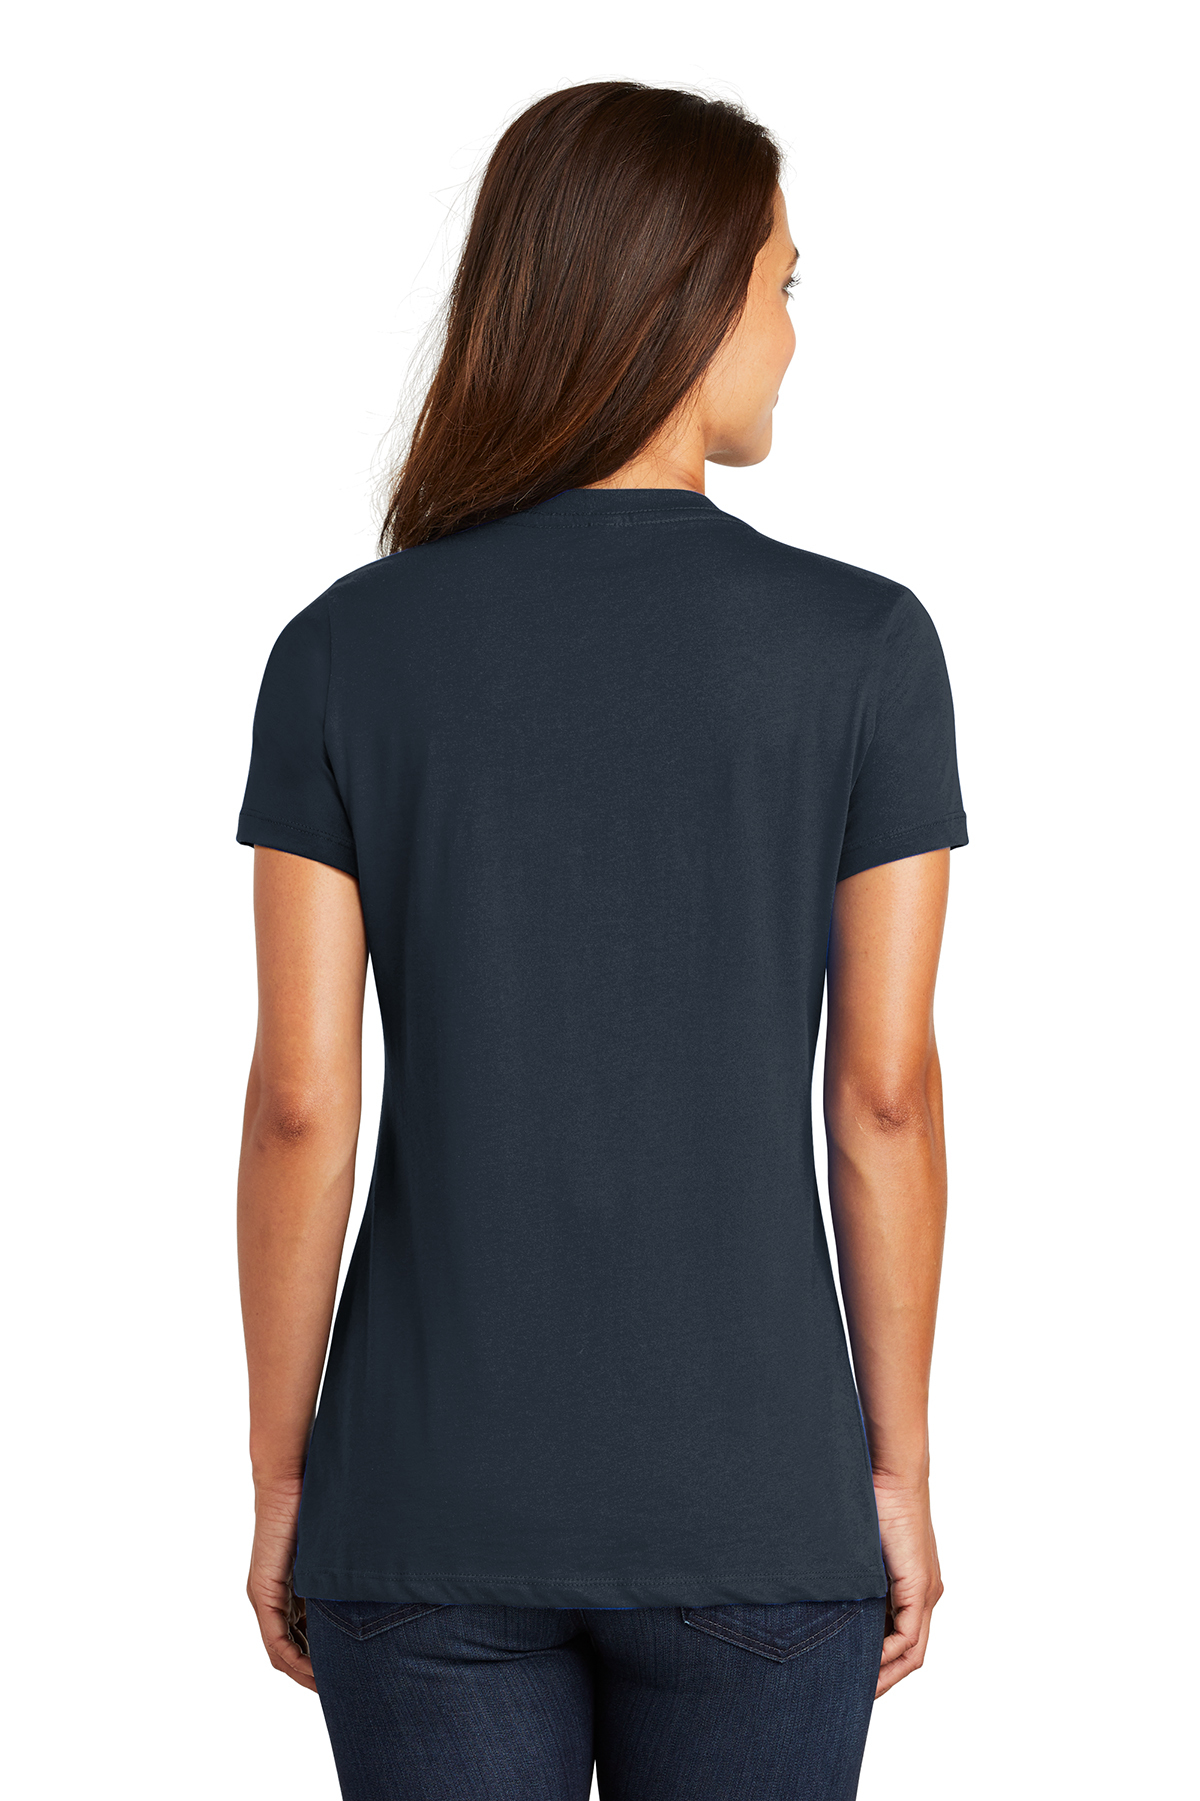 District Women's Perfect Weight V-Neck Tee | Product | SanMar